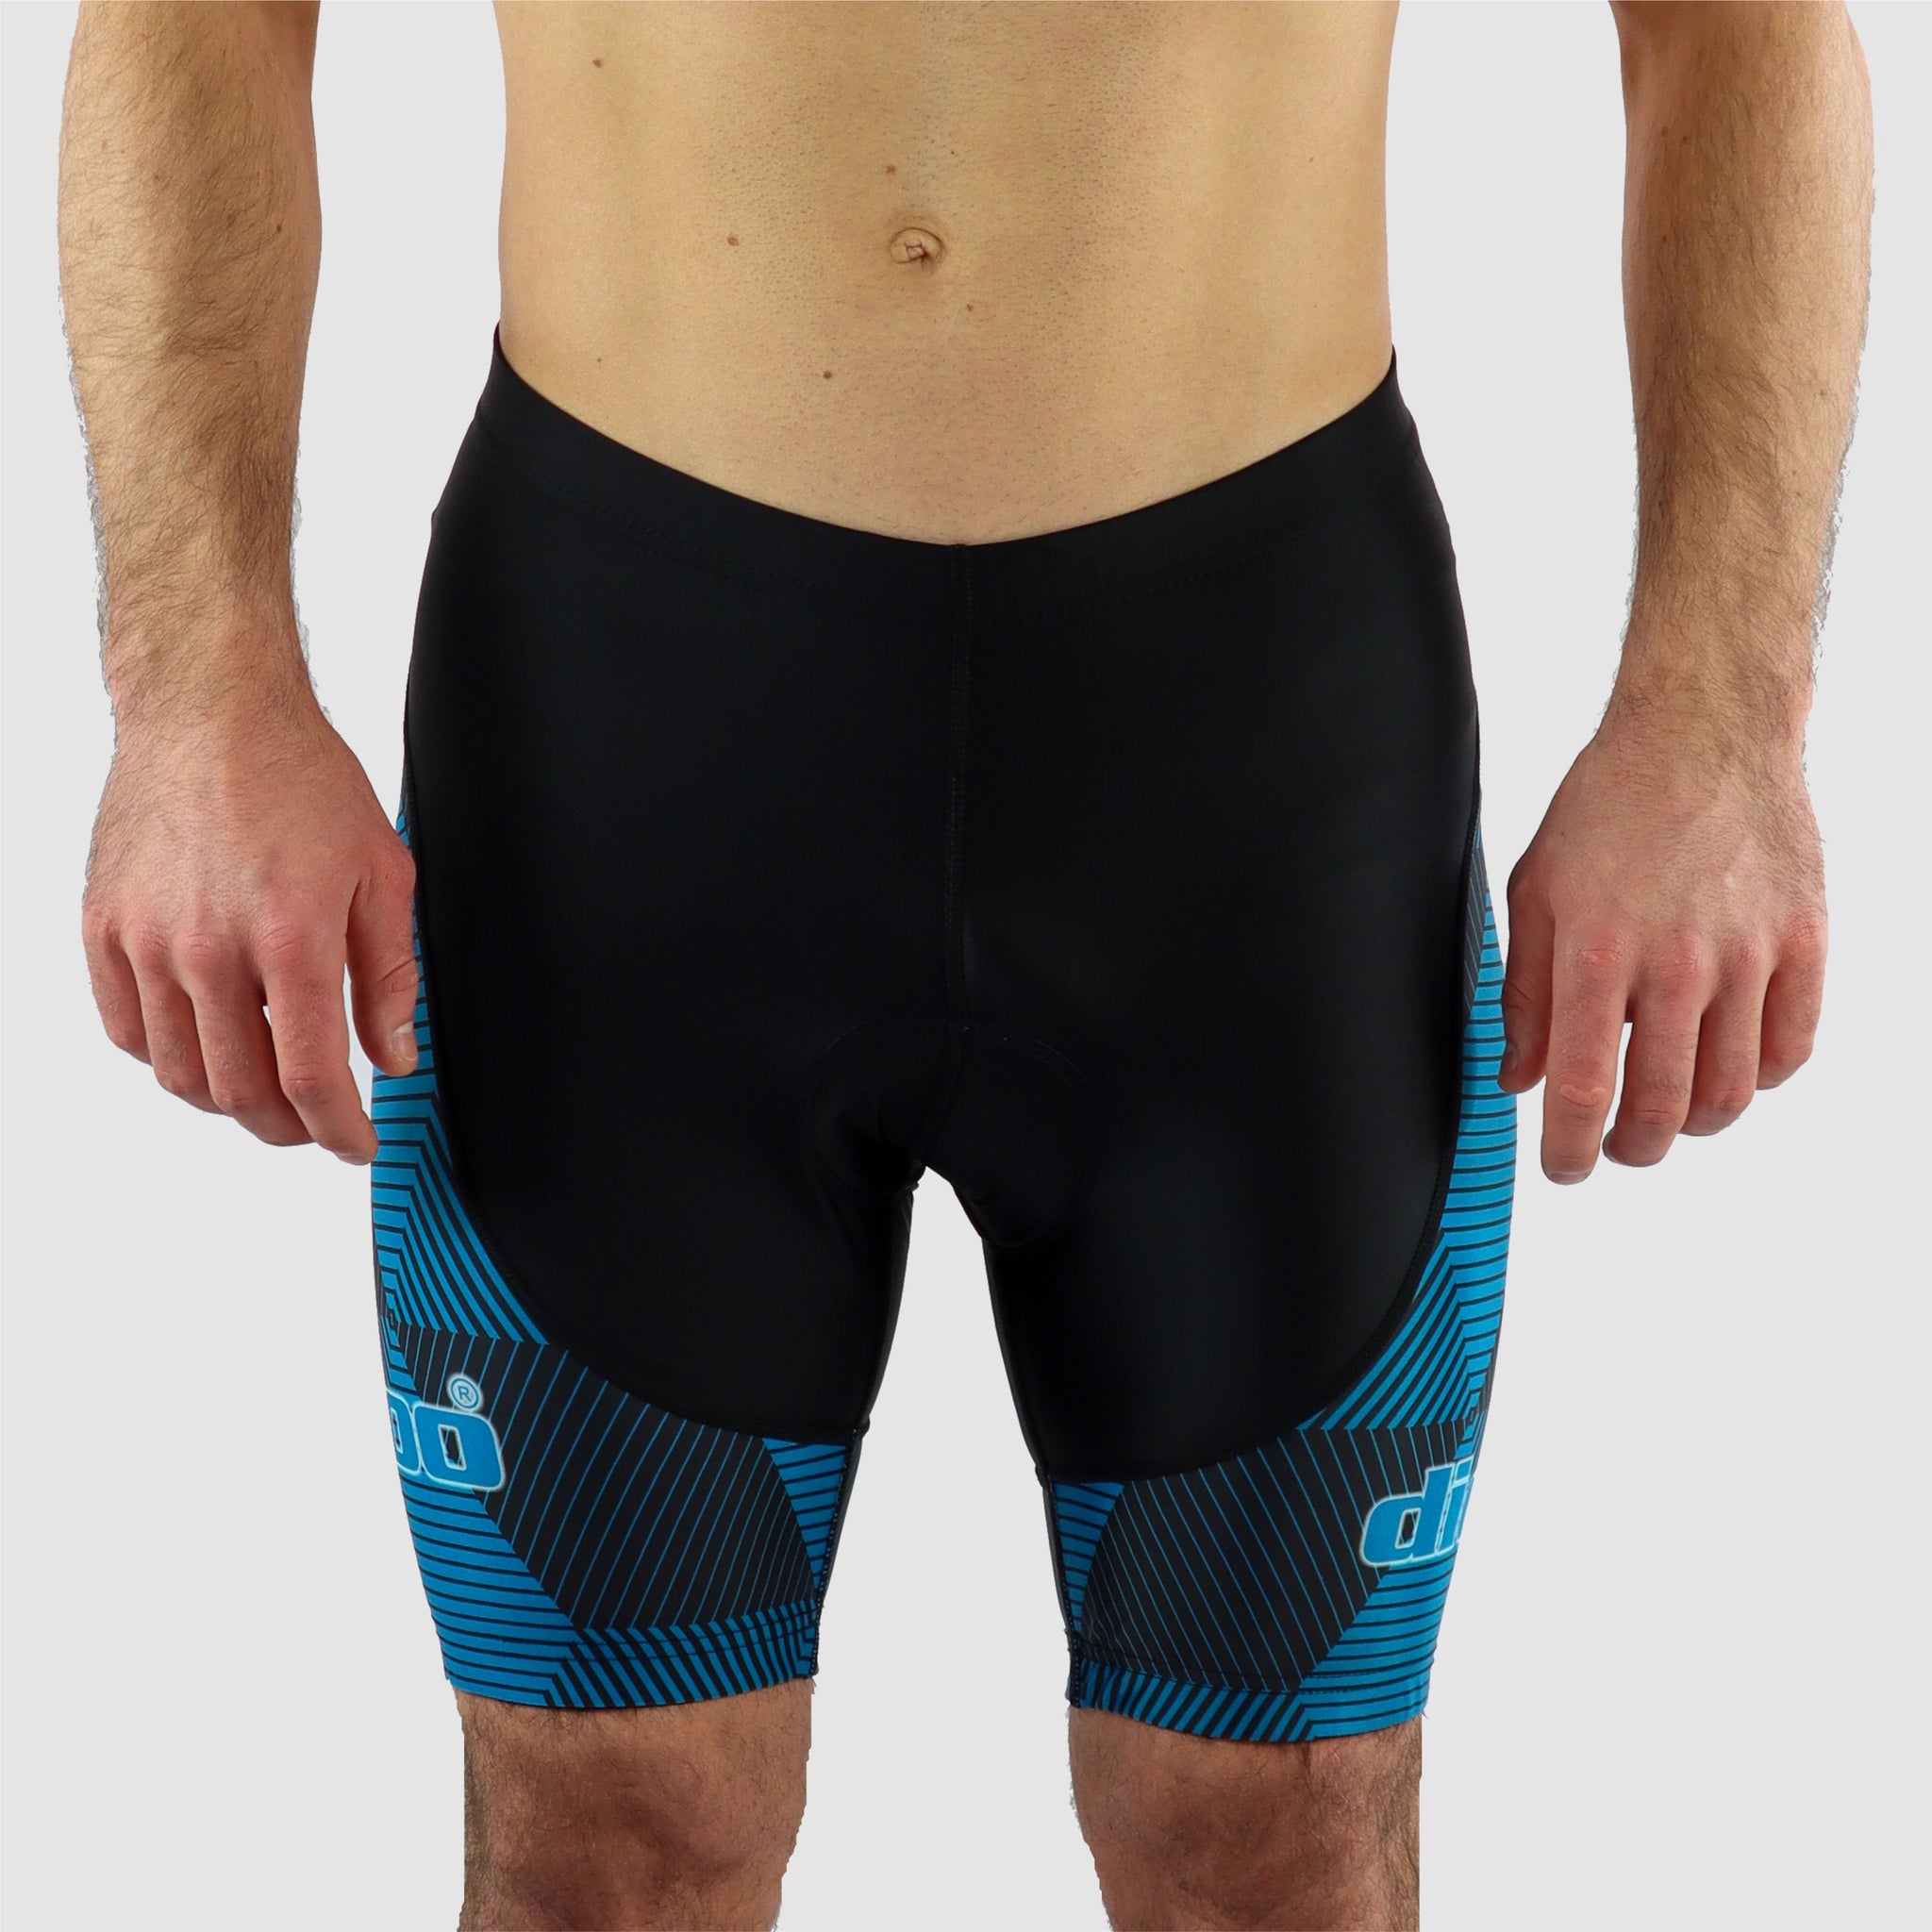 DiDOO Men's Classic Quick Dry Padded Cycling Shorts Black and Light Blue